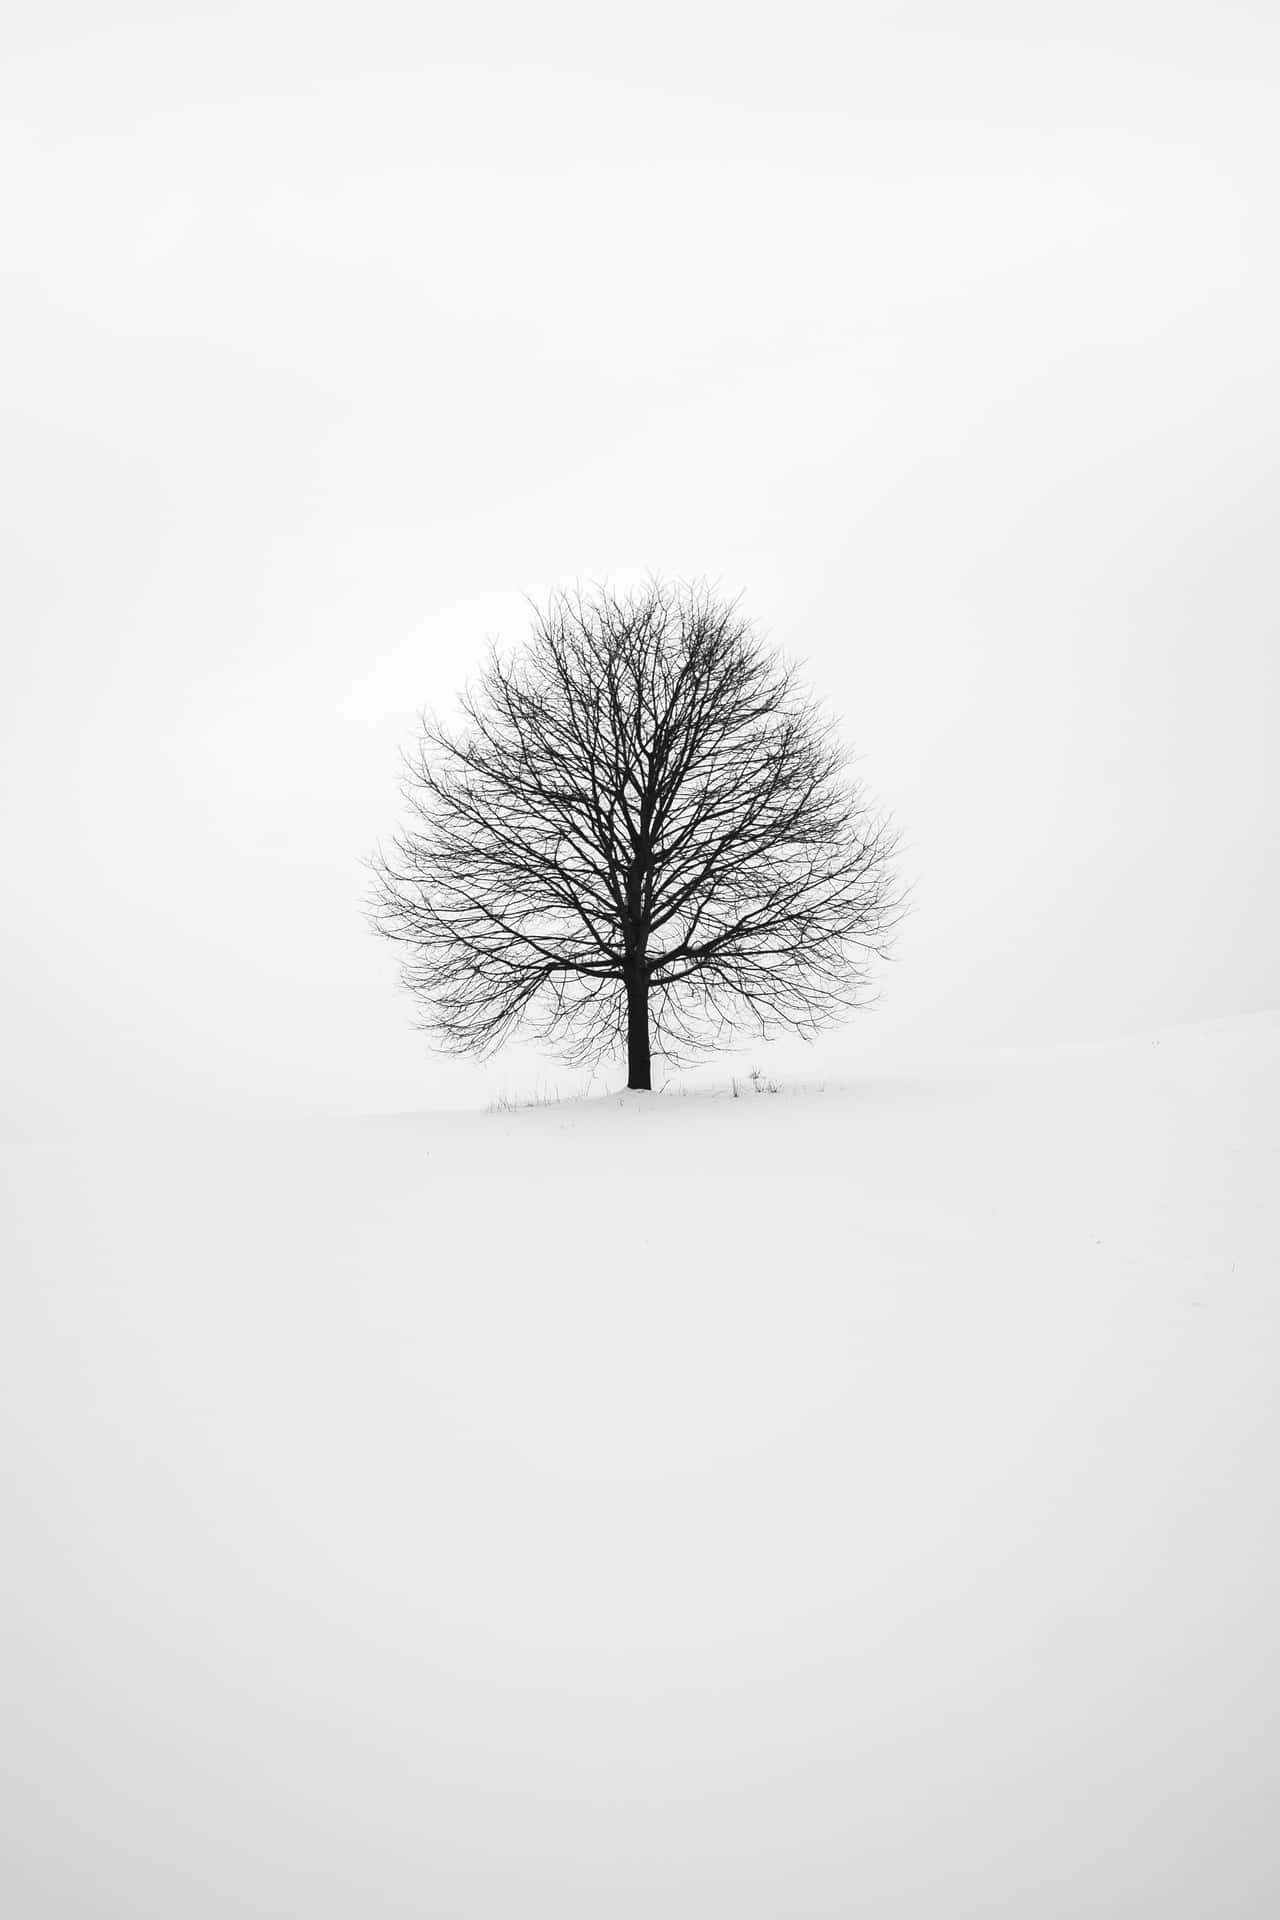 A Lone Tree In A Snow Covered Field